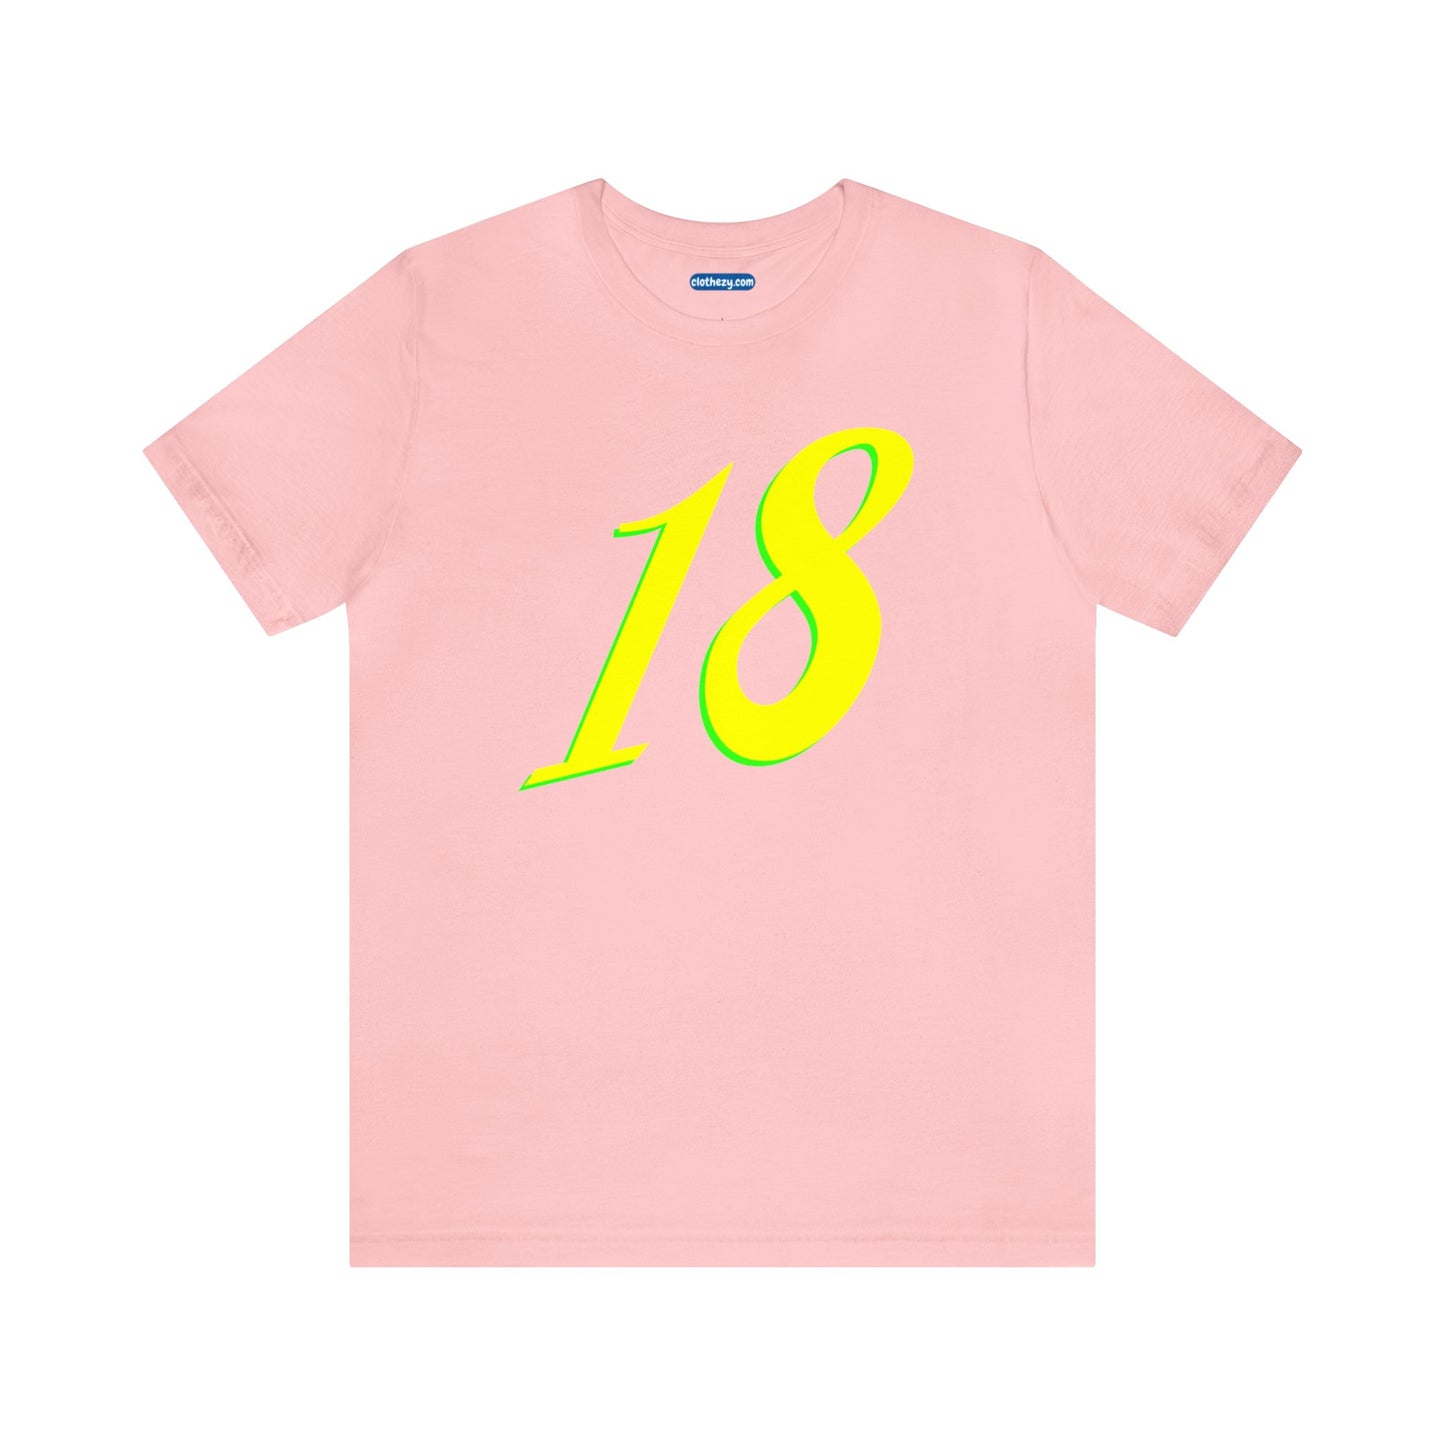 Number 18 Design - Soft Cotton Tee for birthdays and celebrations, Gift for friends and family, Multiple Options by clothezy.com in Pink Size Small - Buy Now